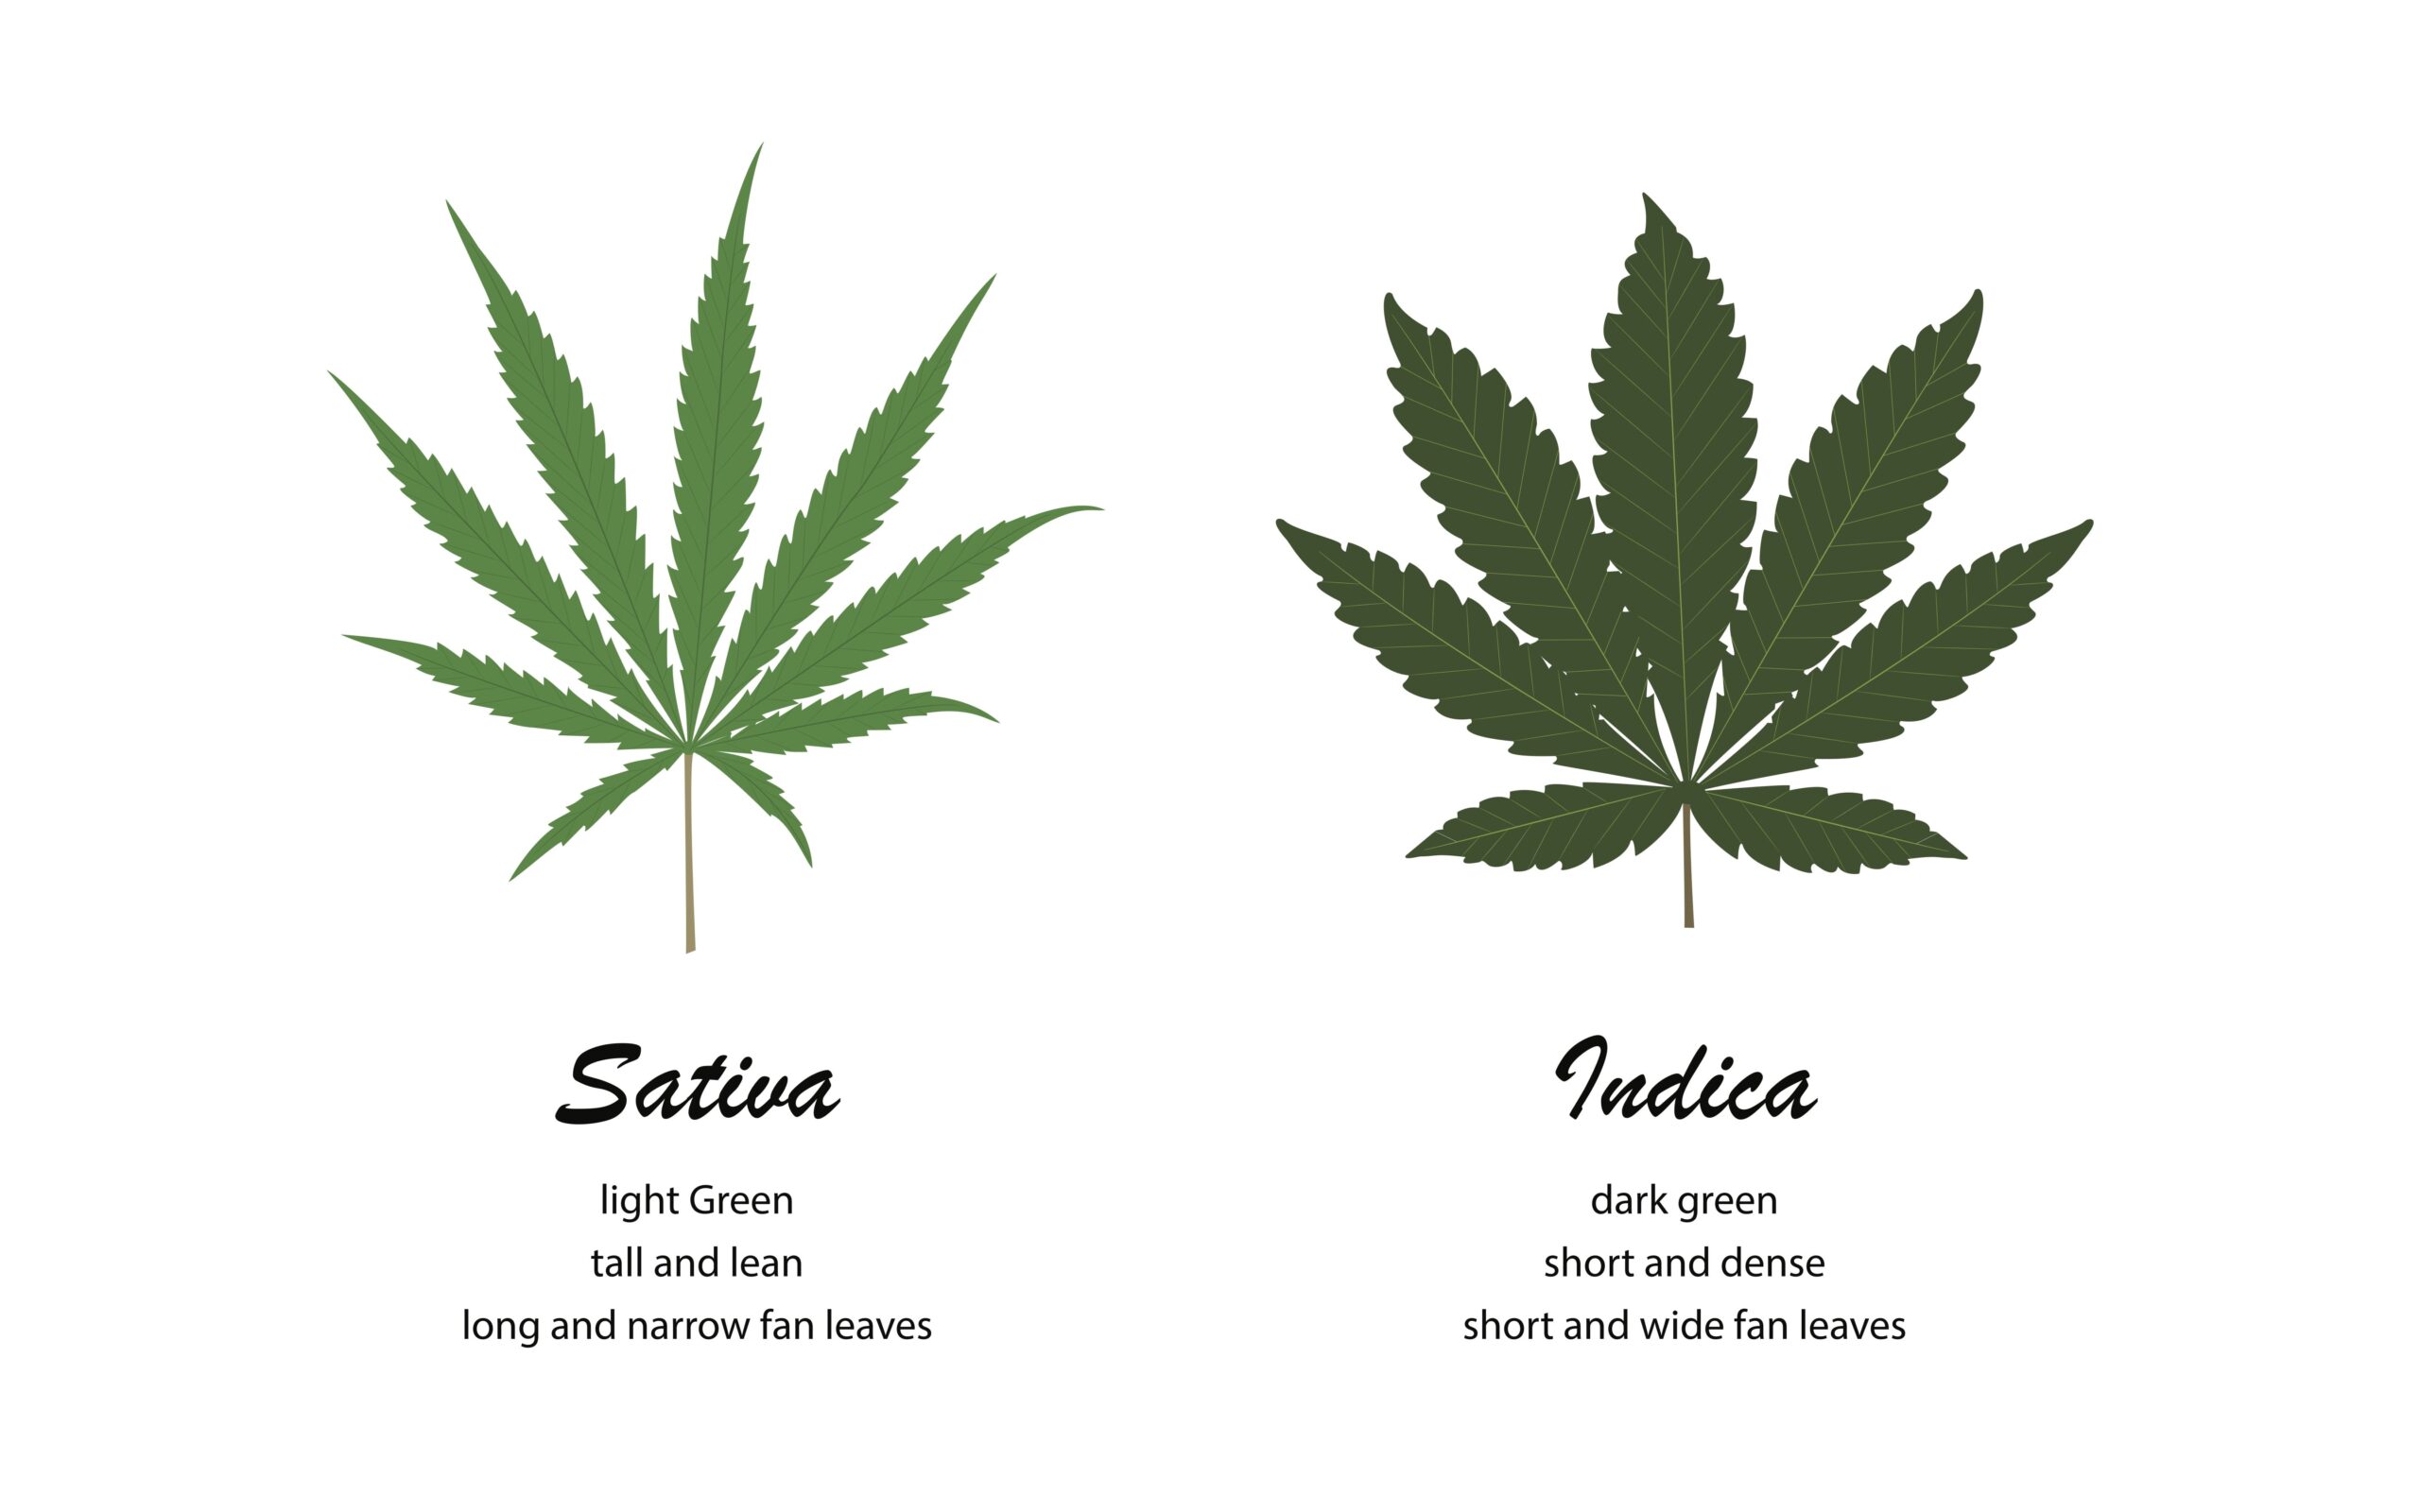 Sativa light green tall and lean leaf next to indica dark green and short leaf